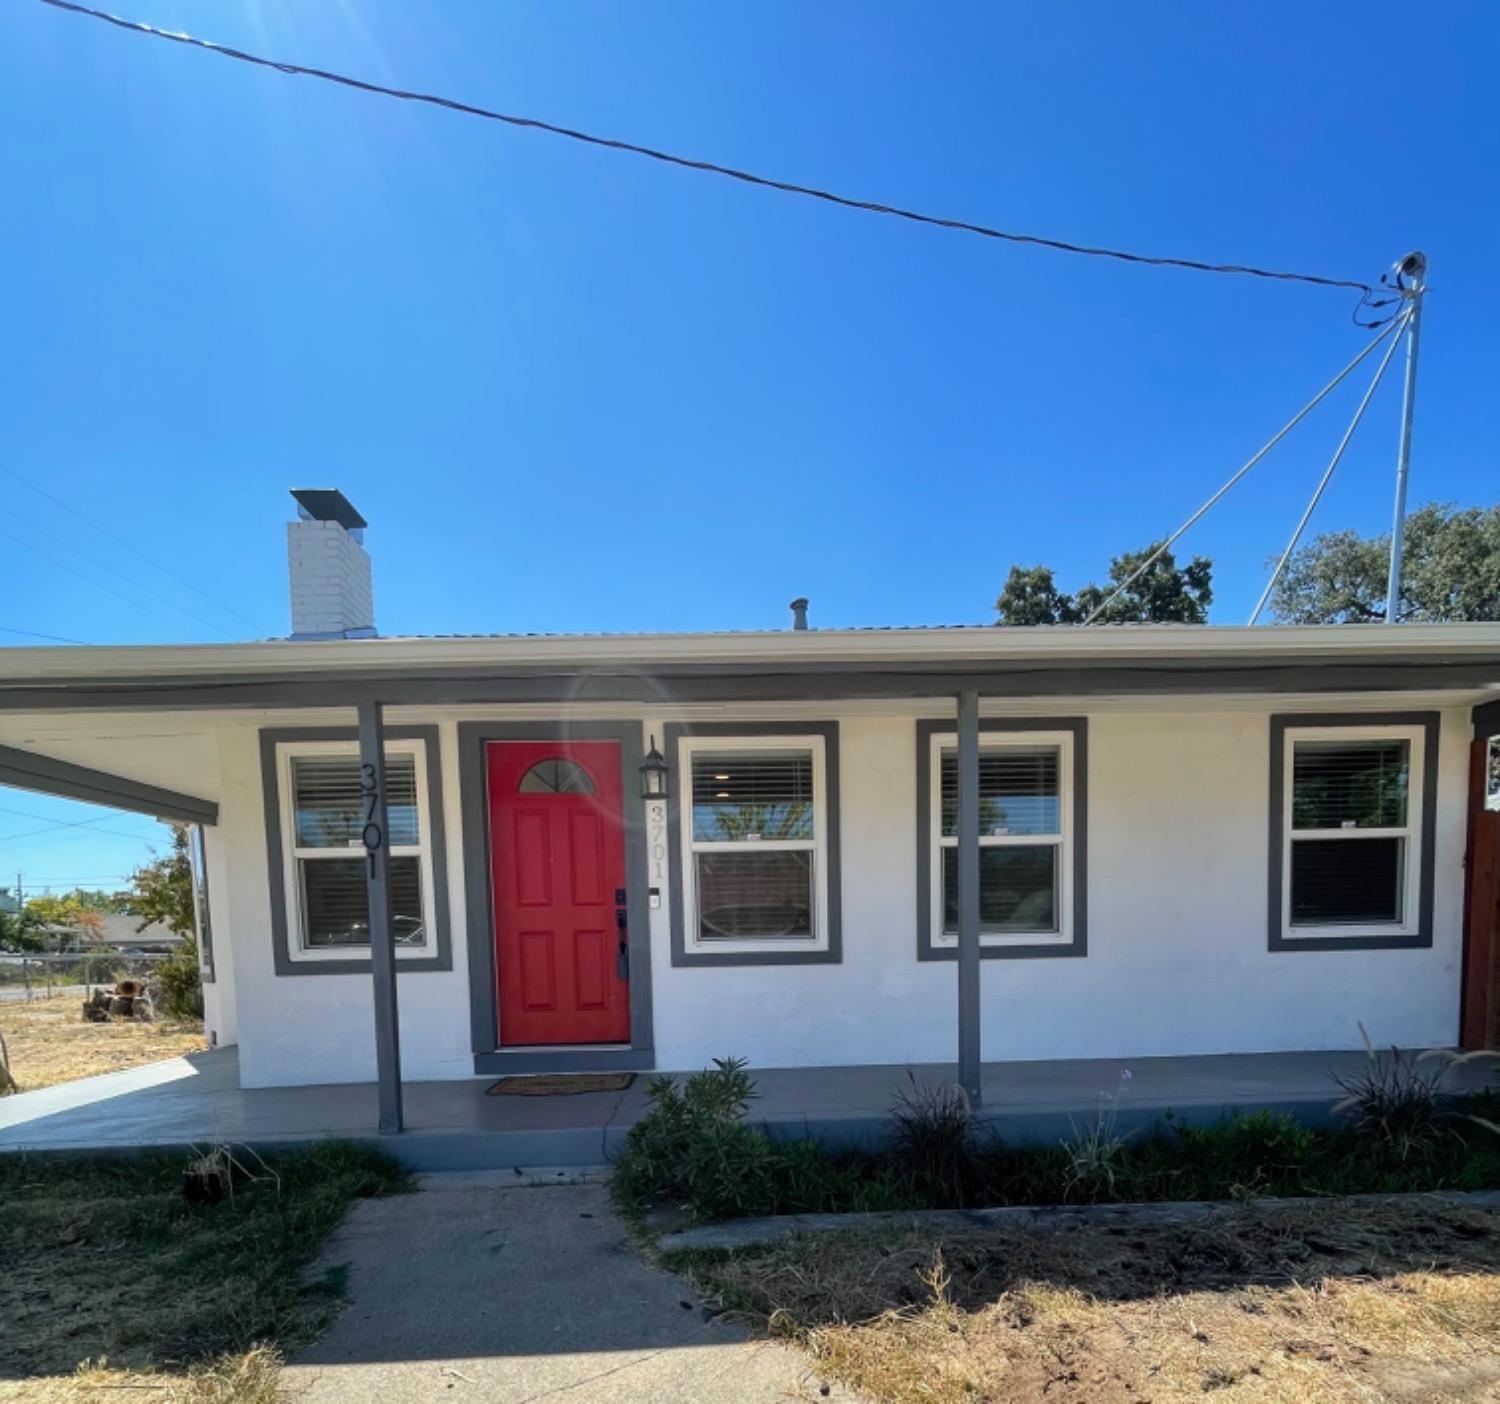 Adorable 2 bed/ 1 ba corner lot home. Completely remodeled with plenty of parking space. Possible RV